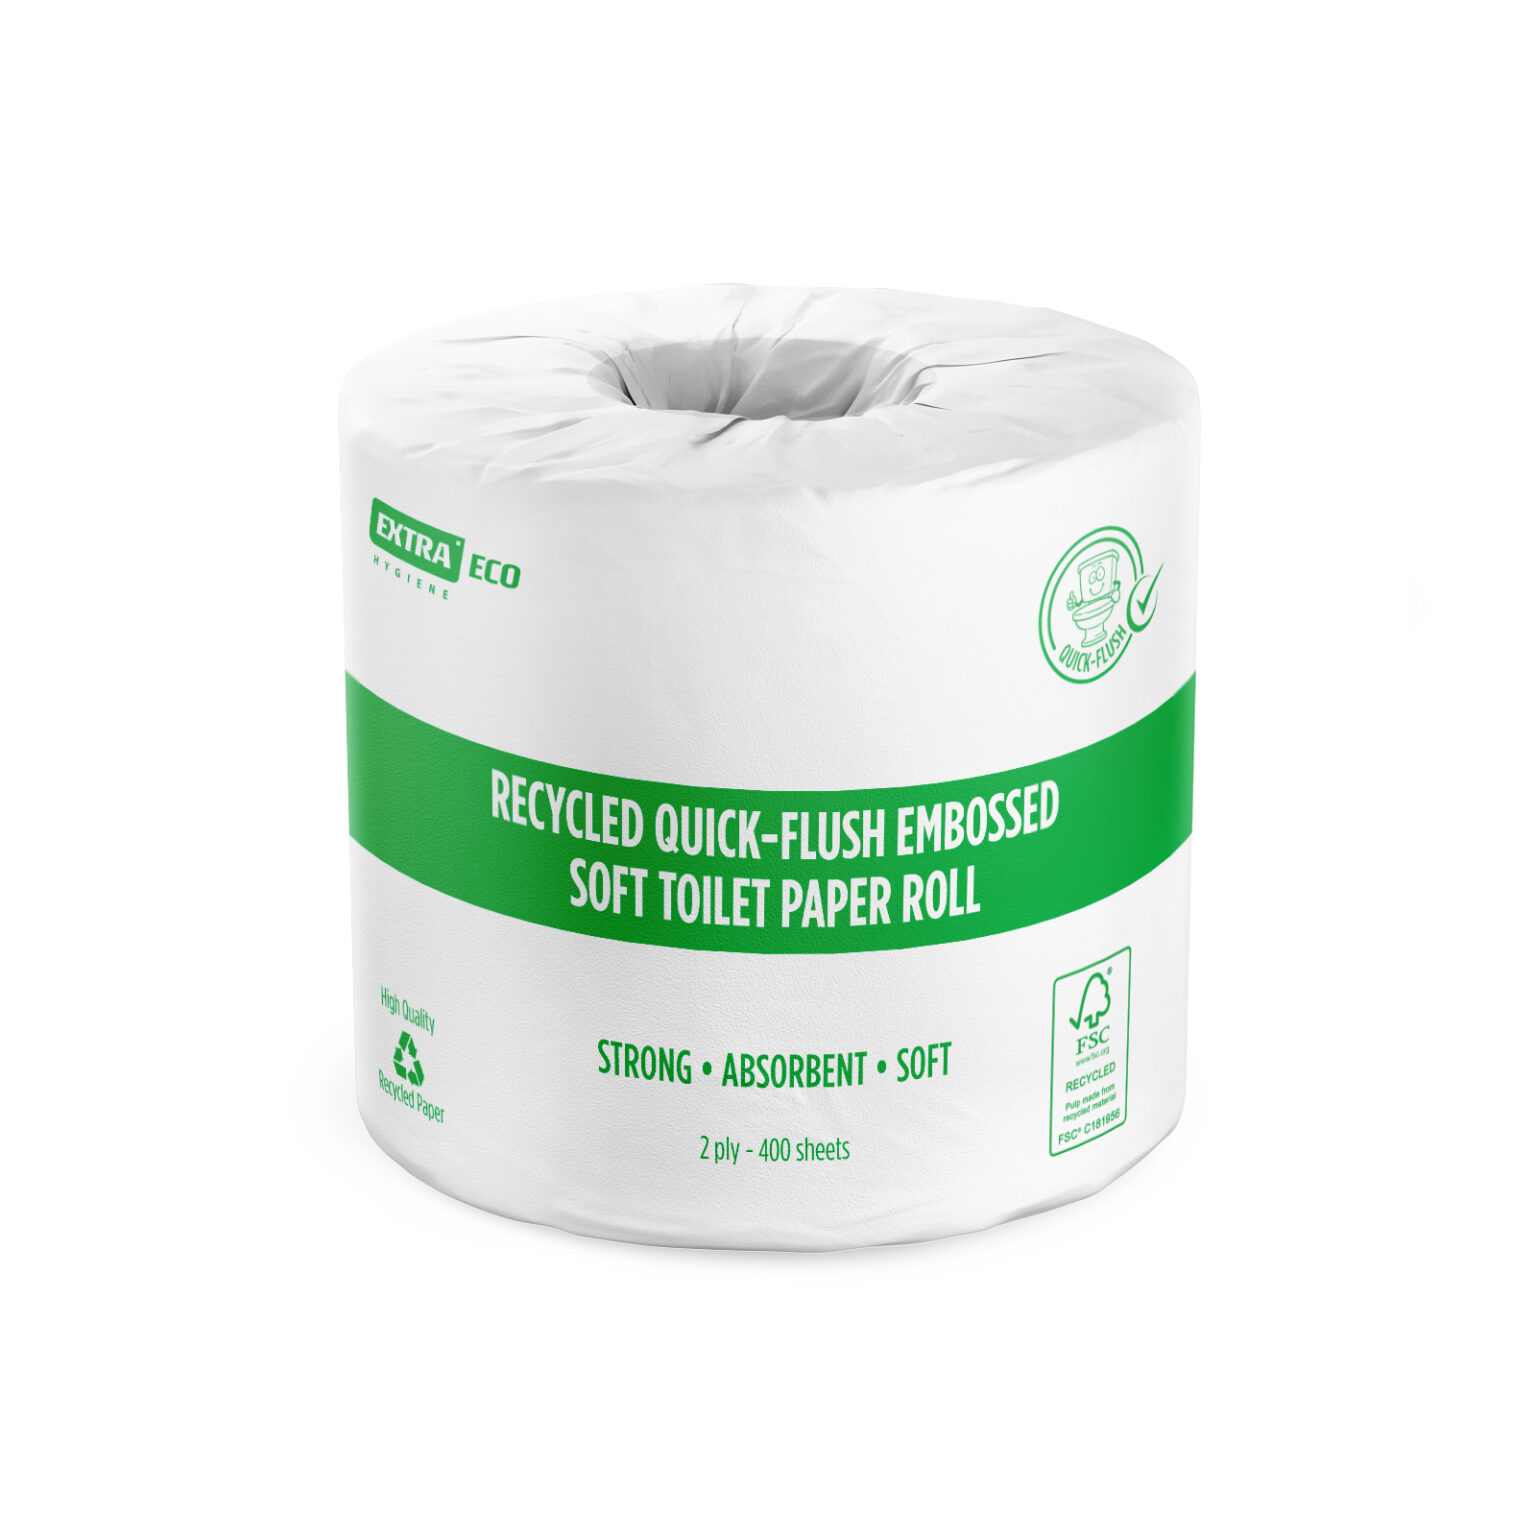 17606-Recycled-quick-flush-embossed-soft-toilet-paper-roll-front-1600x1600